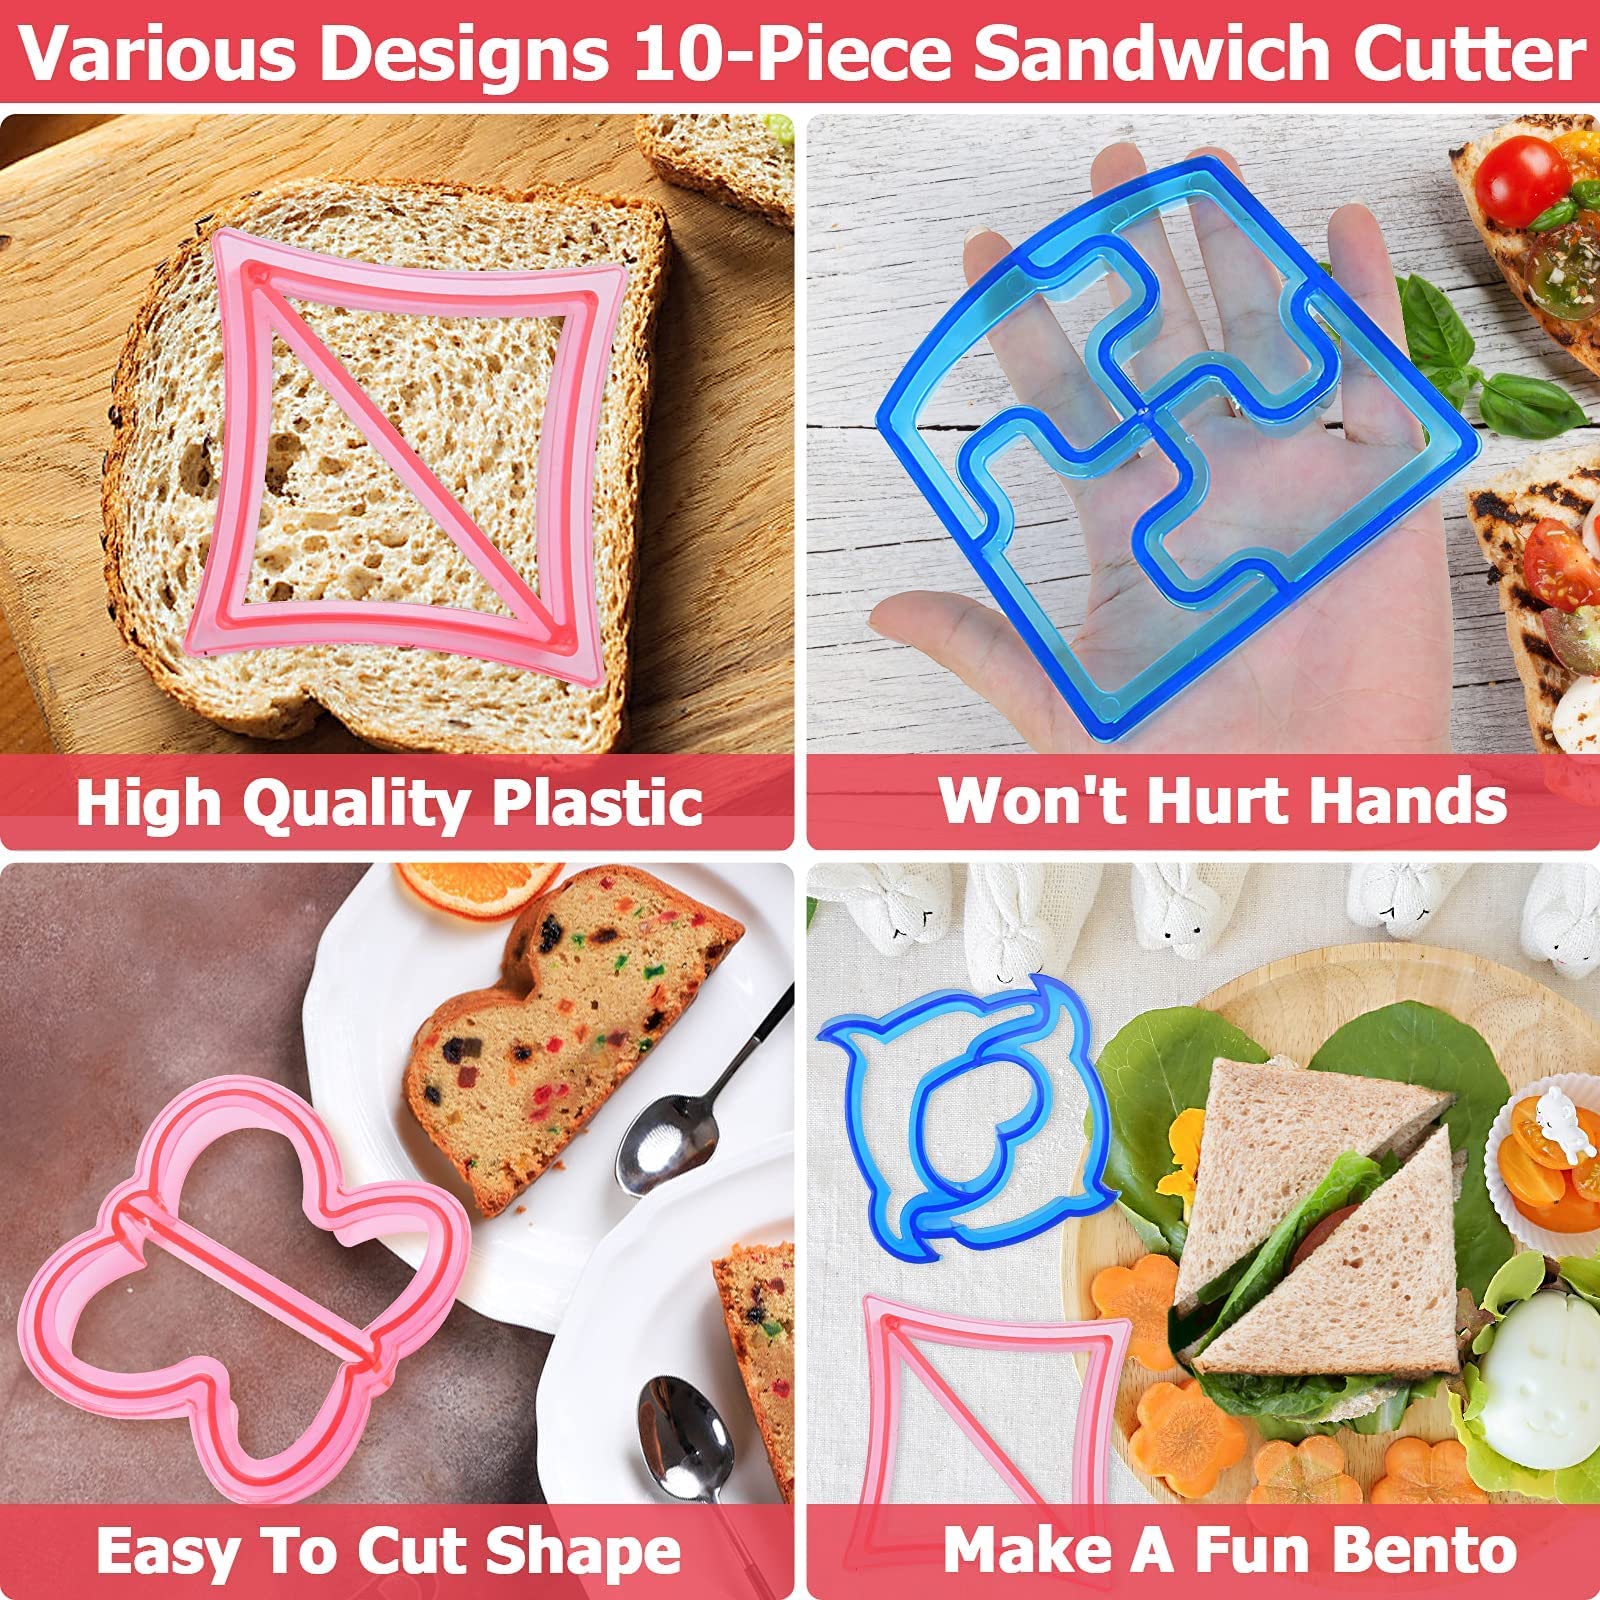 Sandwich Cutters for Kids, 32 PCS Sandwich Bread Cutters Set, Metal Cookie Cutter Set, Food Grade Pick Forks, Cookie Cutters Shapes, Christmas Star Mouse Vegetable Fruit Molds for Kids Bento Box Lunch